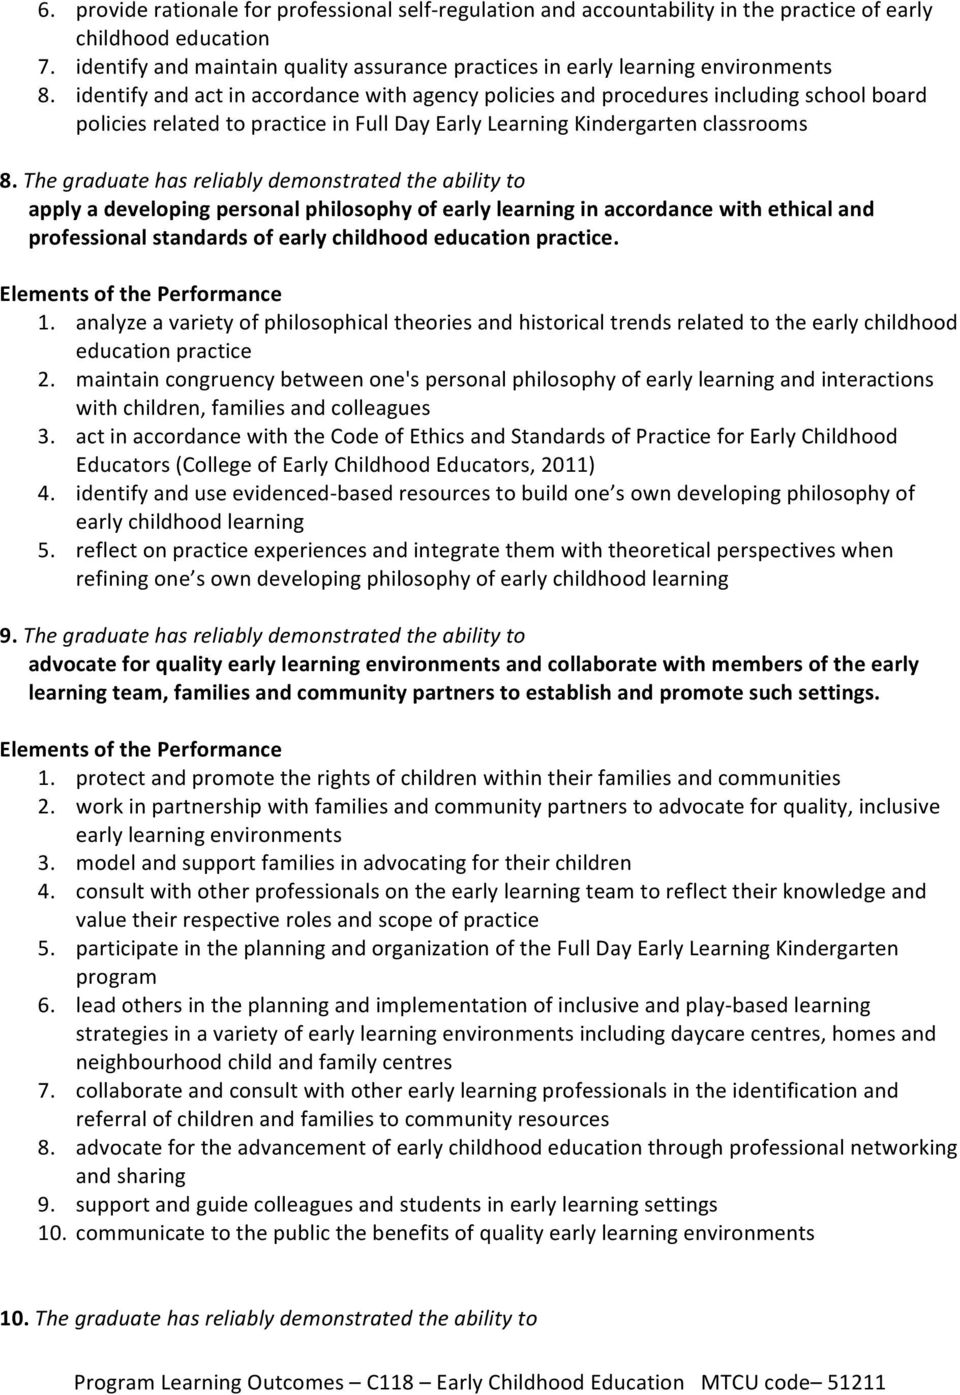 identify and act in accordance with agency policies and procedures including school board policies related to practice in Full Day Early Learning Kindergarten classrooms 8.